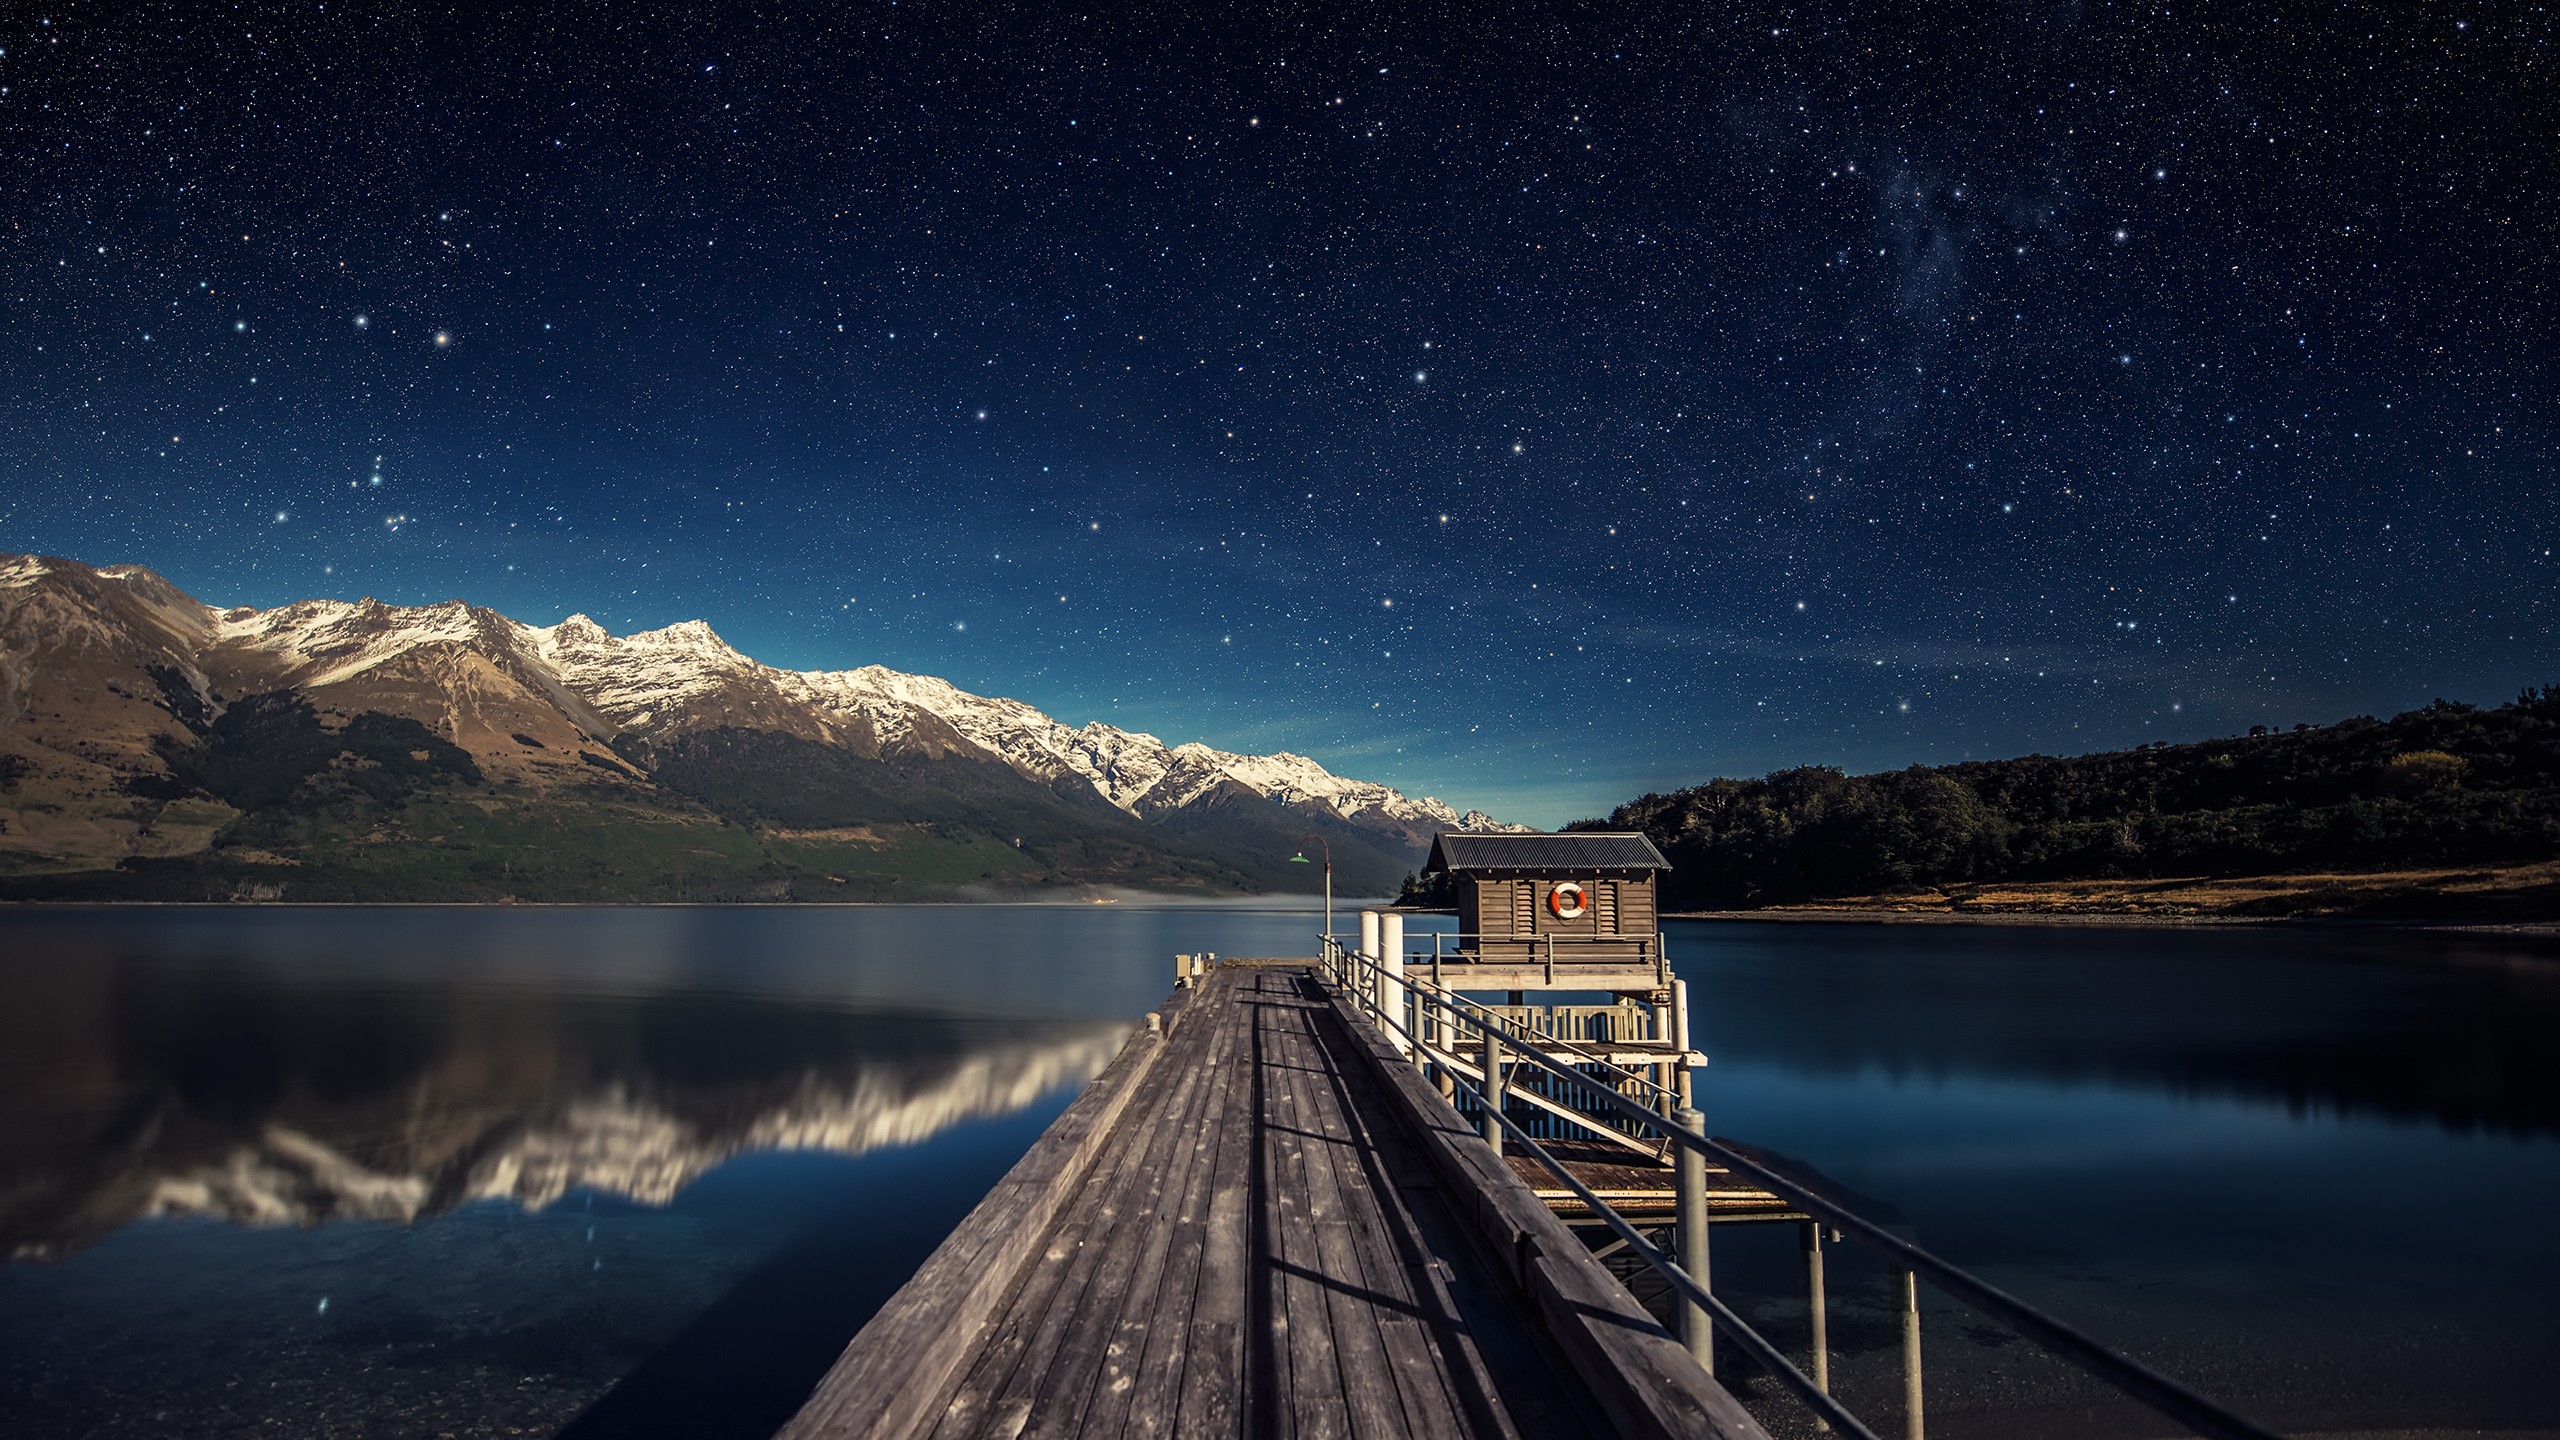 General 2560x1440 pier lake landscape mountains snowy mountain stars nature calm waters sky outdoors